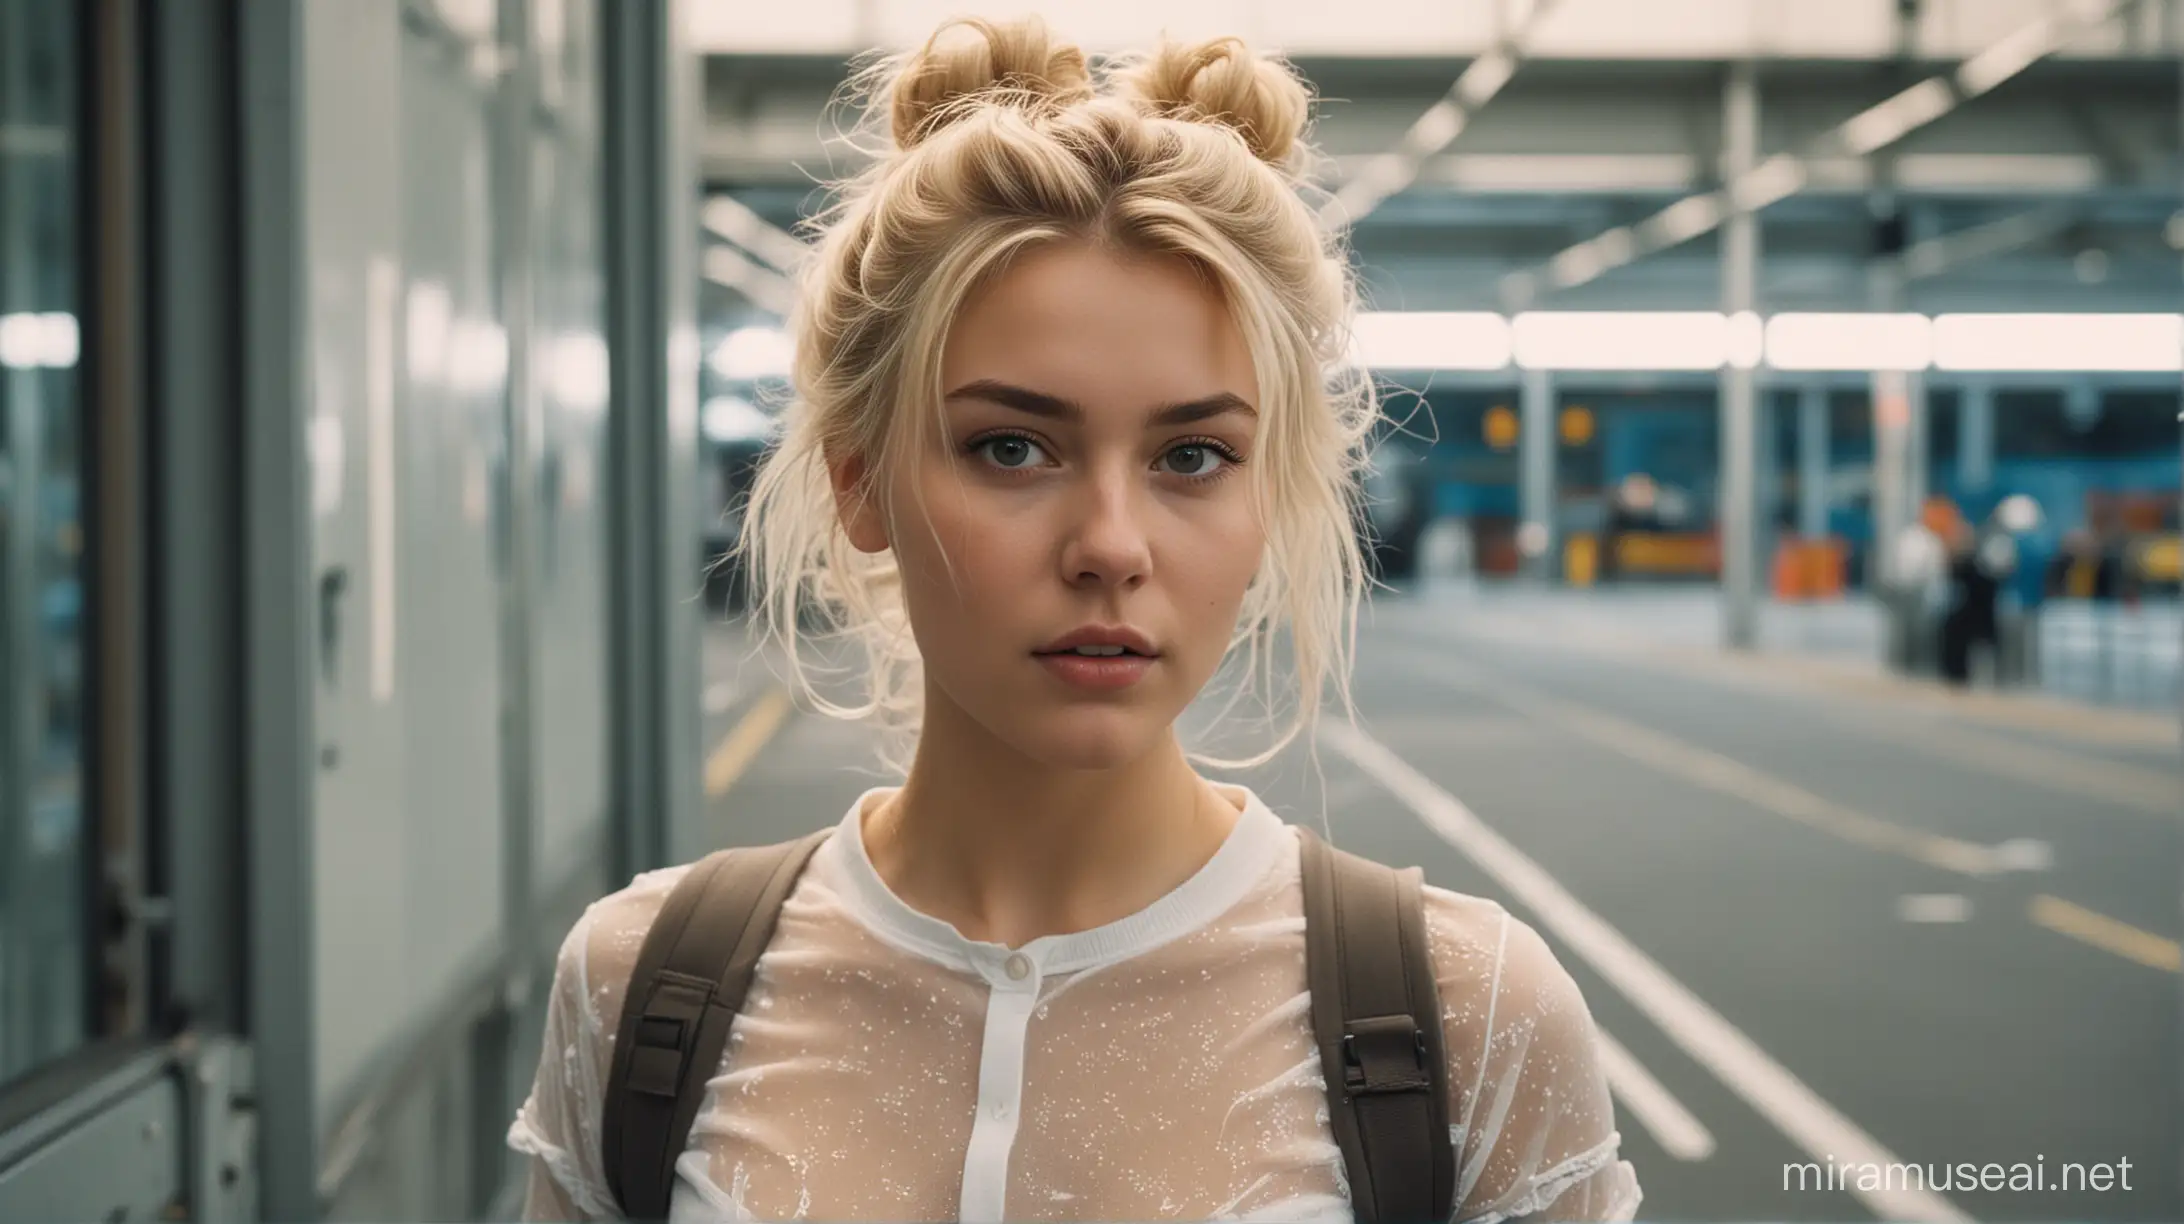 film photography, light fabric, using a 35mm lens, f/2, HD, Bokeh, Intricately detailed, film, grain, Beautiful Photogenic Nordic girl with blonde messy hair with hair buns hairstyle, realistic skin, gorgeous attractive voluptuous body, standing in flight terminal gate, tight clothing, science fiction cyber theme, photo